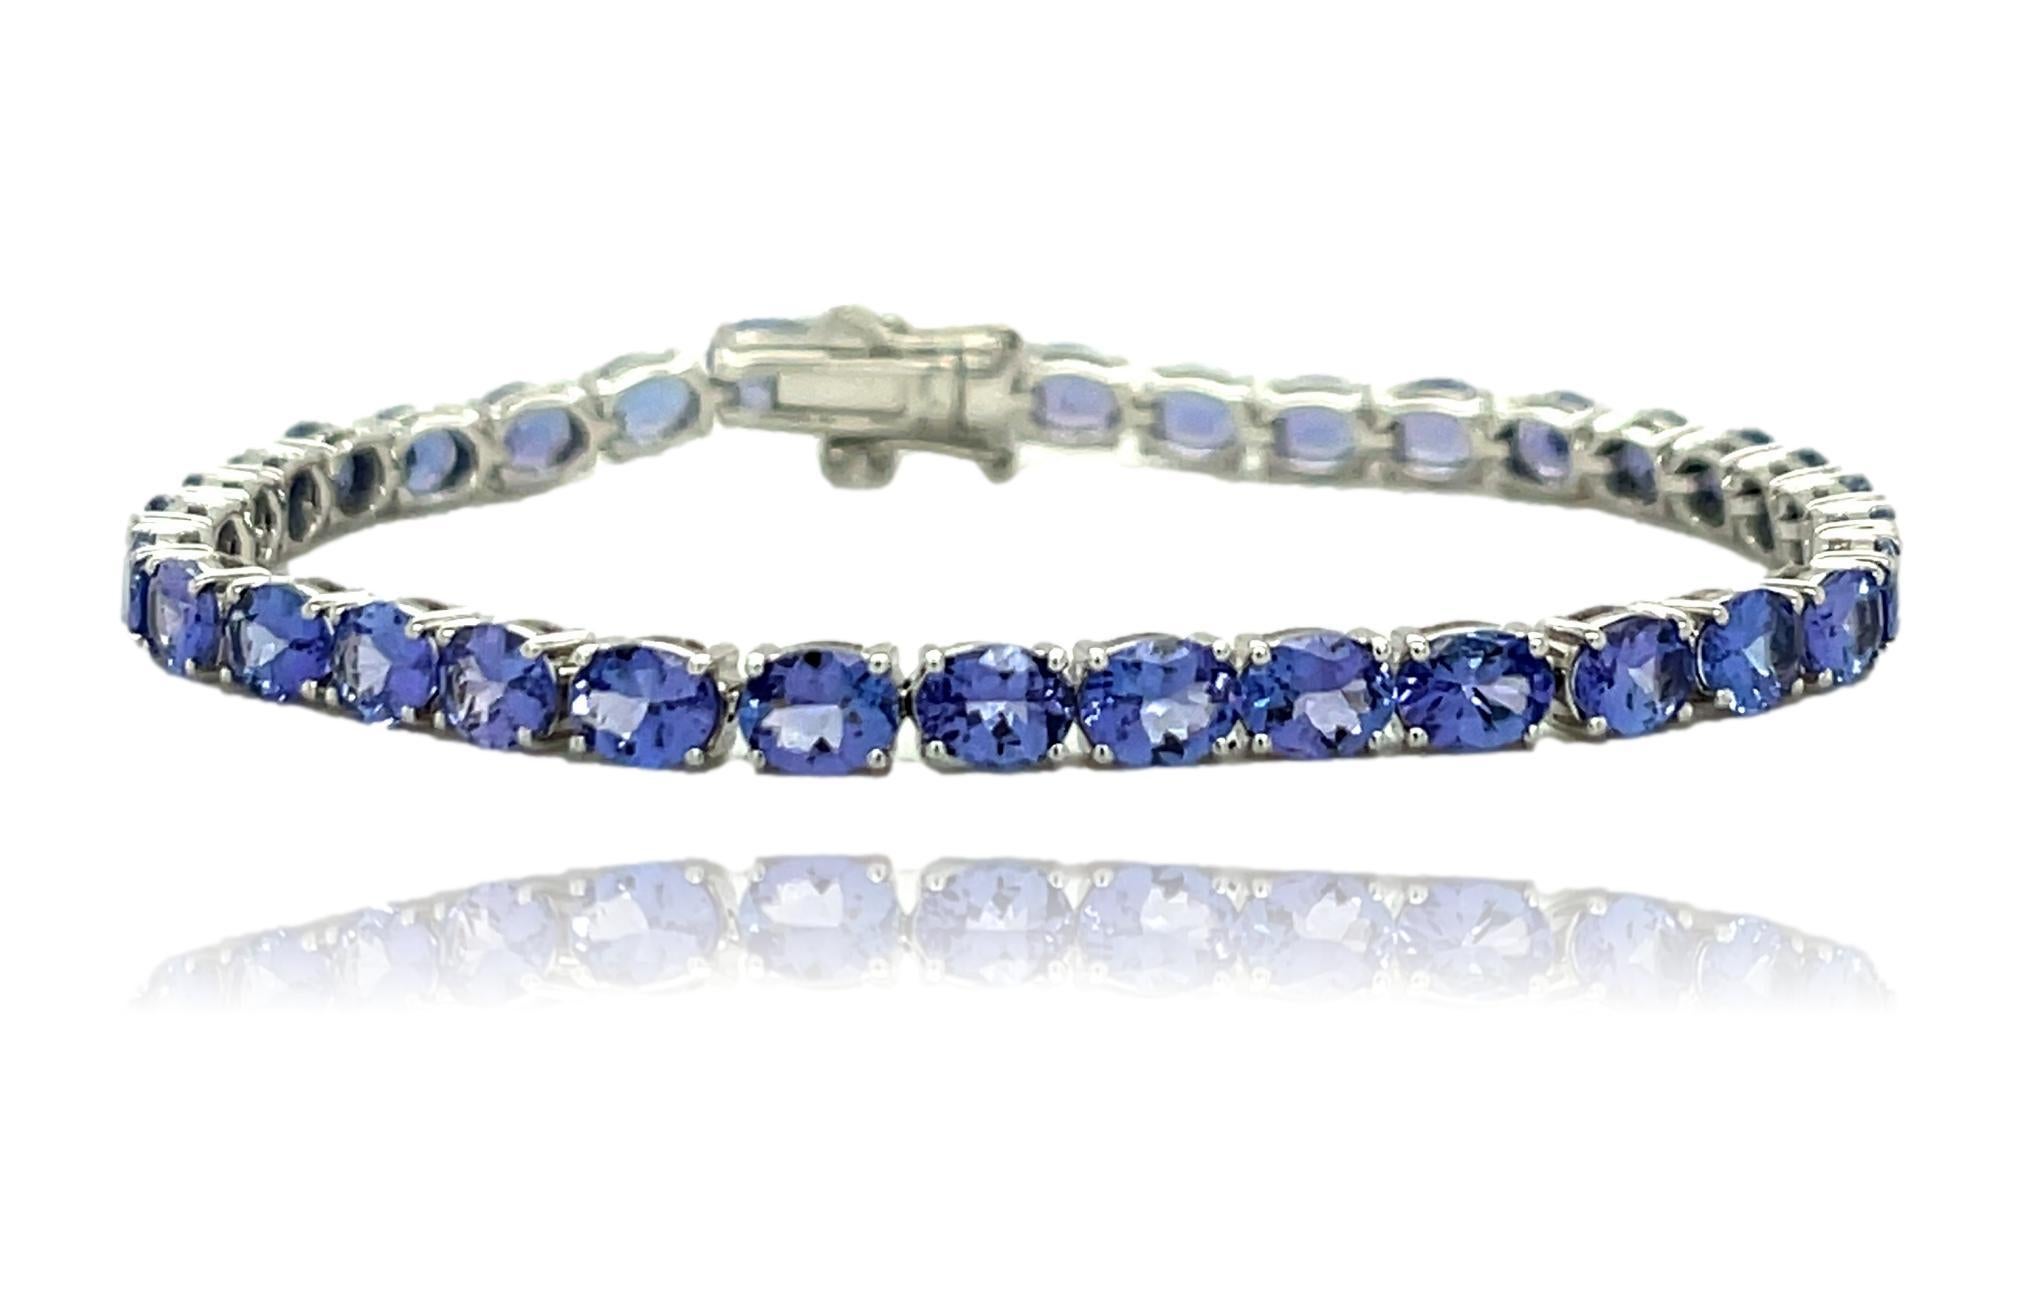 This stunning 18K White Gold Tennis Bracelet has 34 oval AAA quality oval Tanzanites all with 4 prong setting. The bracelet is 7